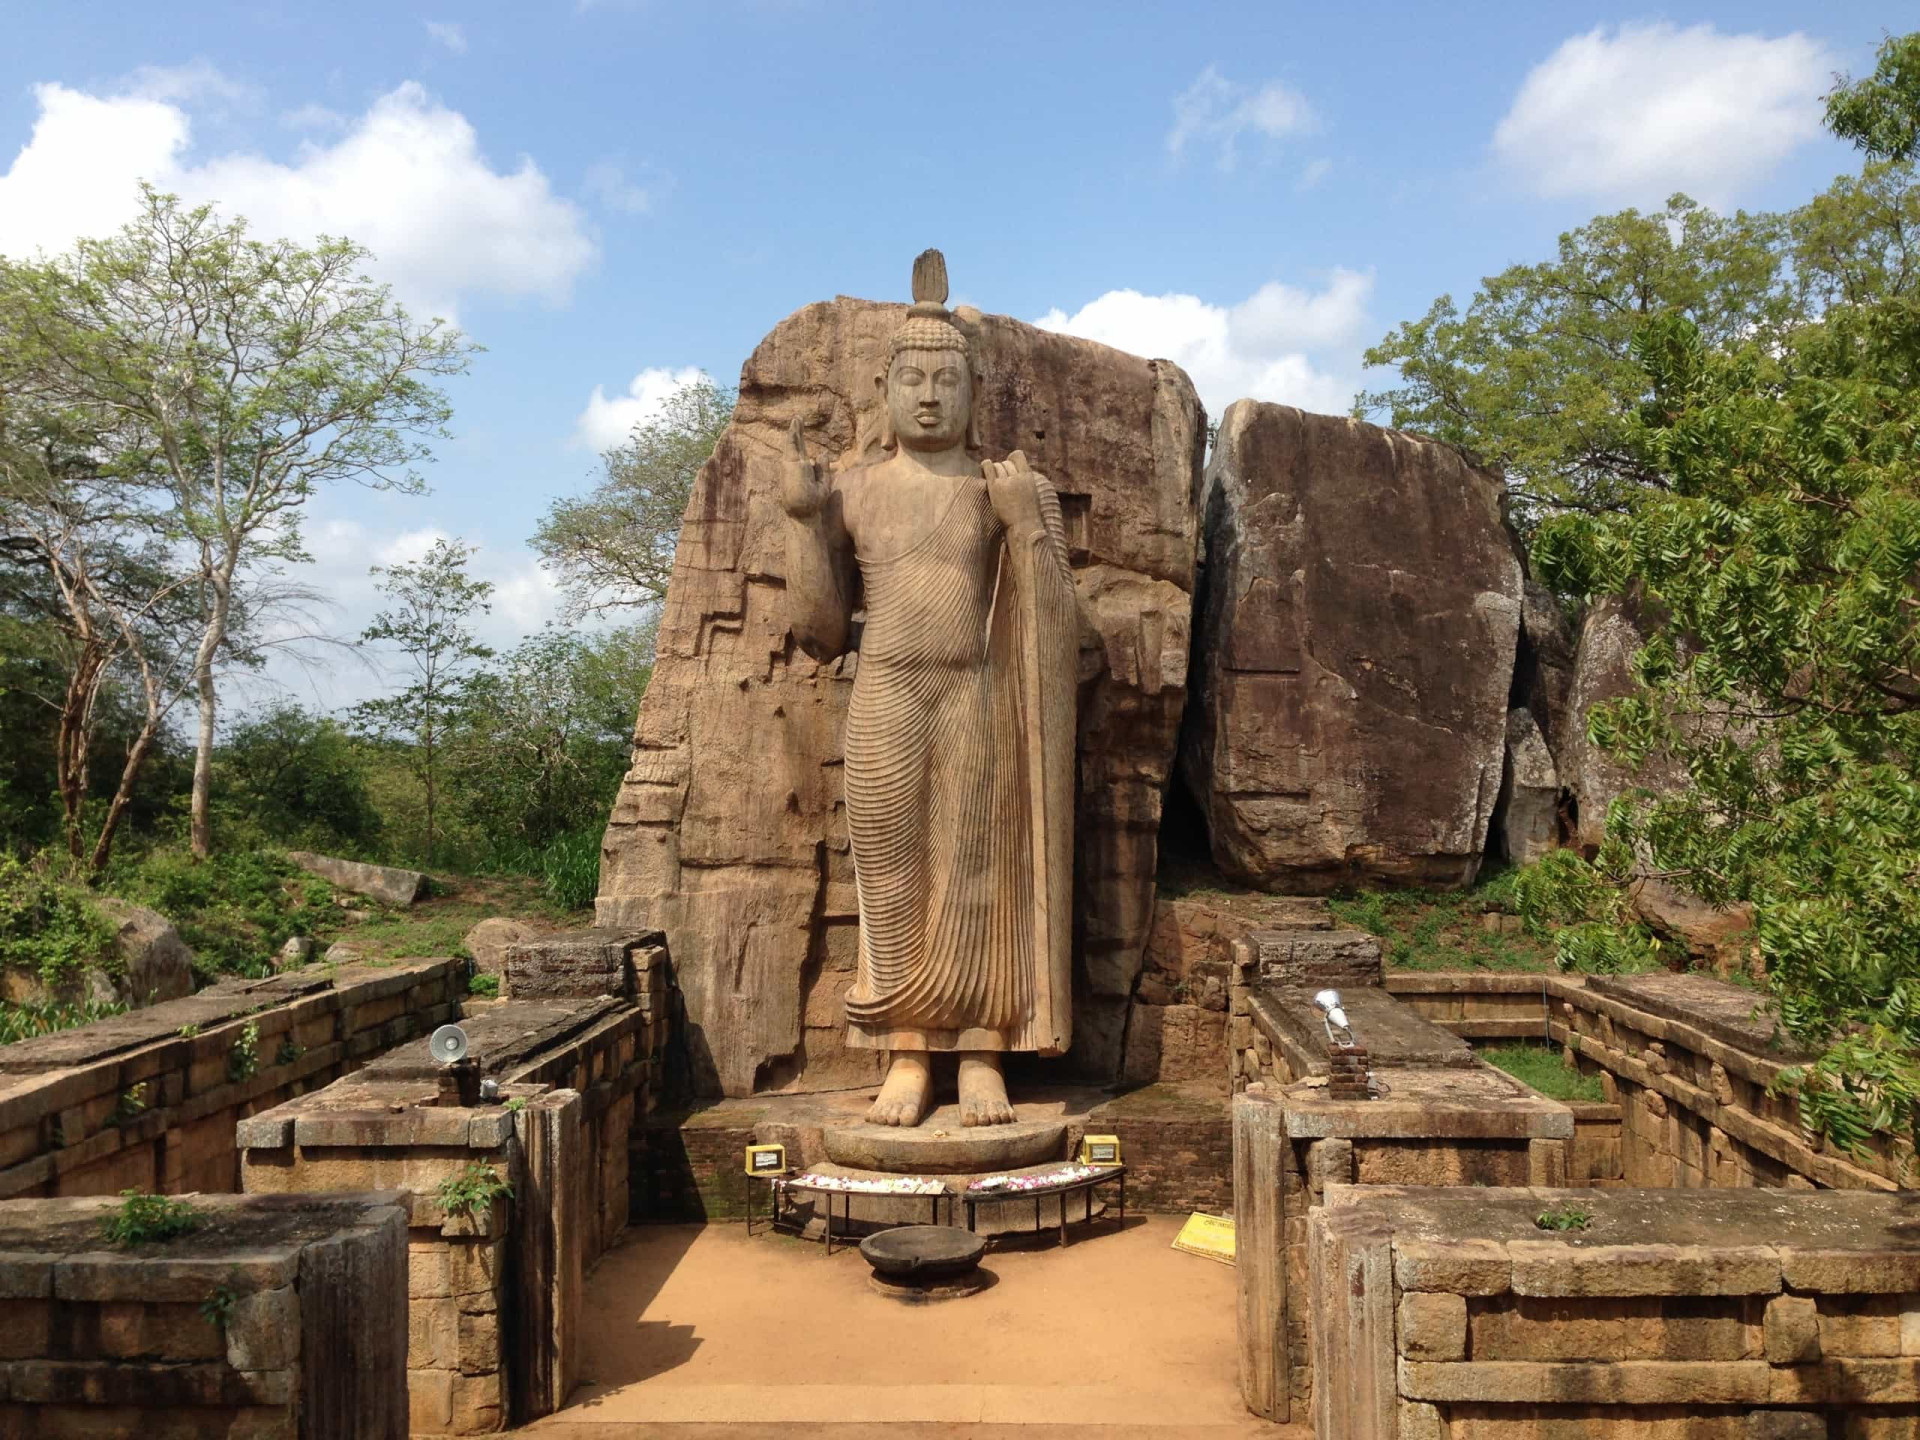 <p>A fine example of a standing statue of Buddha from ancient Sri Lanka, the Avukana Buddha statue dates back to the 5th century and rises more than 12 m (40 ft) from its base.</p><p><a href="https://www.msn.com/en-us/community/channel/vid-7xx8mnucu55yw63we9va2gwr7uihbxwc68fxqp25x6tg4ftibpra?cvid=94631541bc0f4f89bfd59158d696ad7e">Follow us and access great exclusive content every day</a></p>